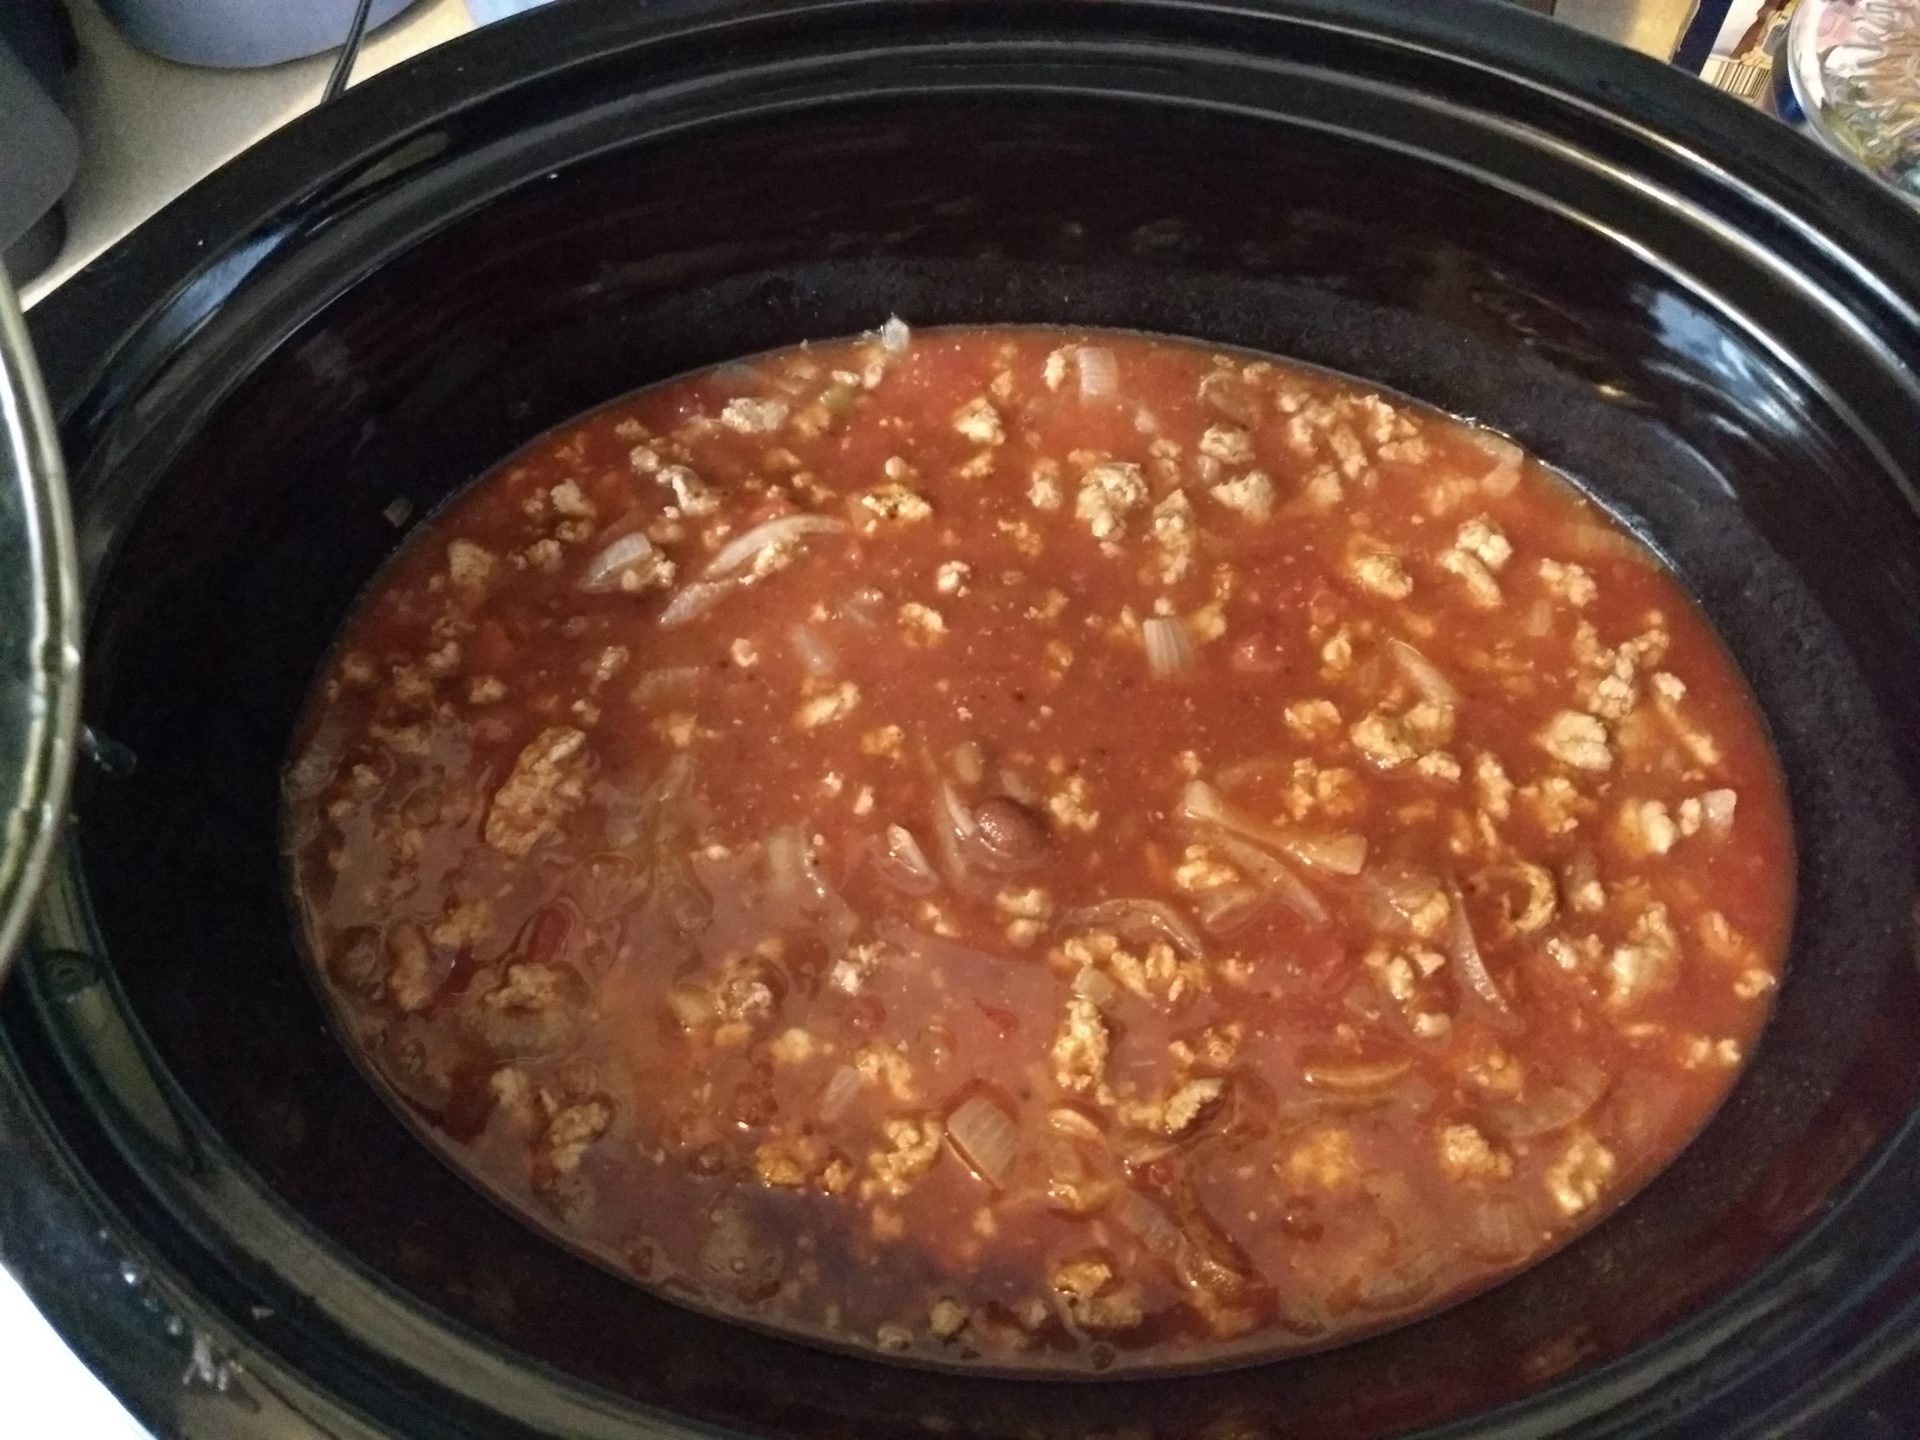 How to Make Slow Cooker Chili